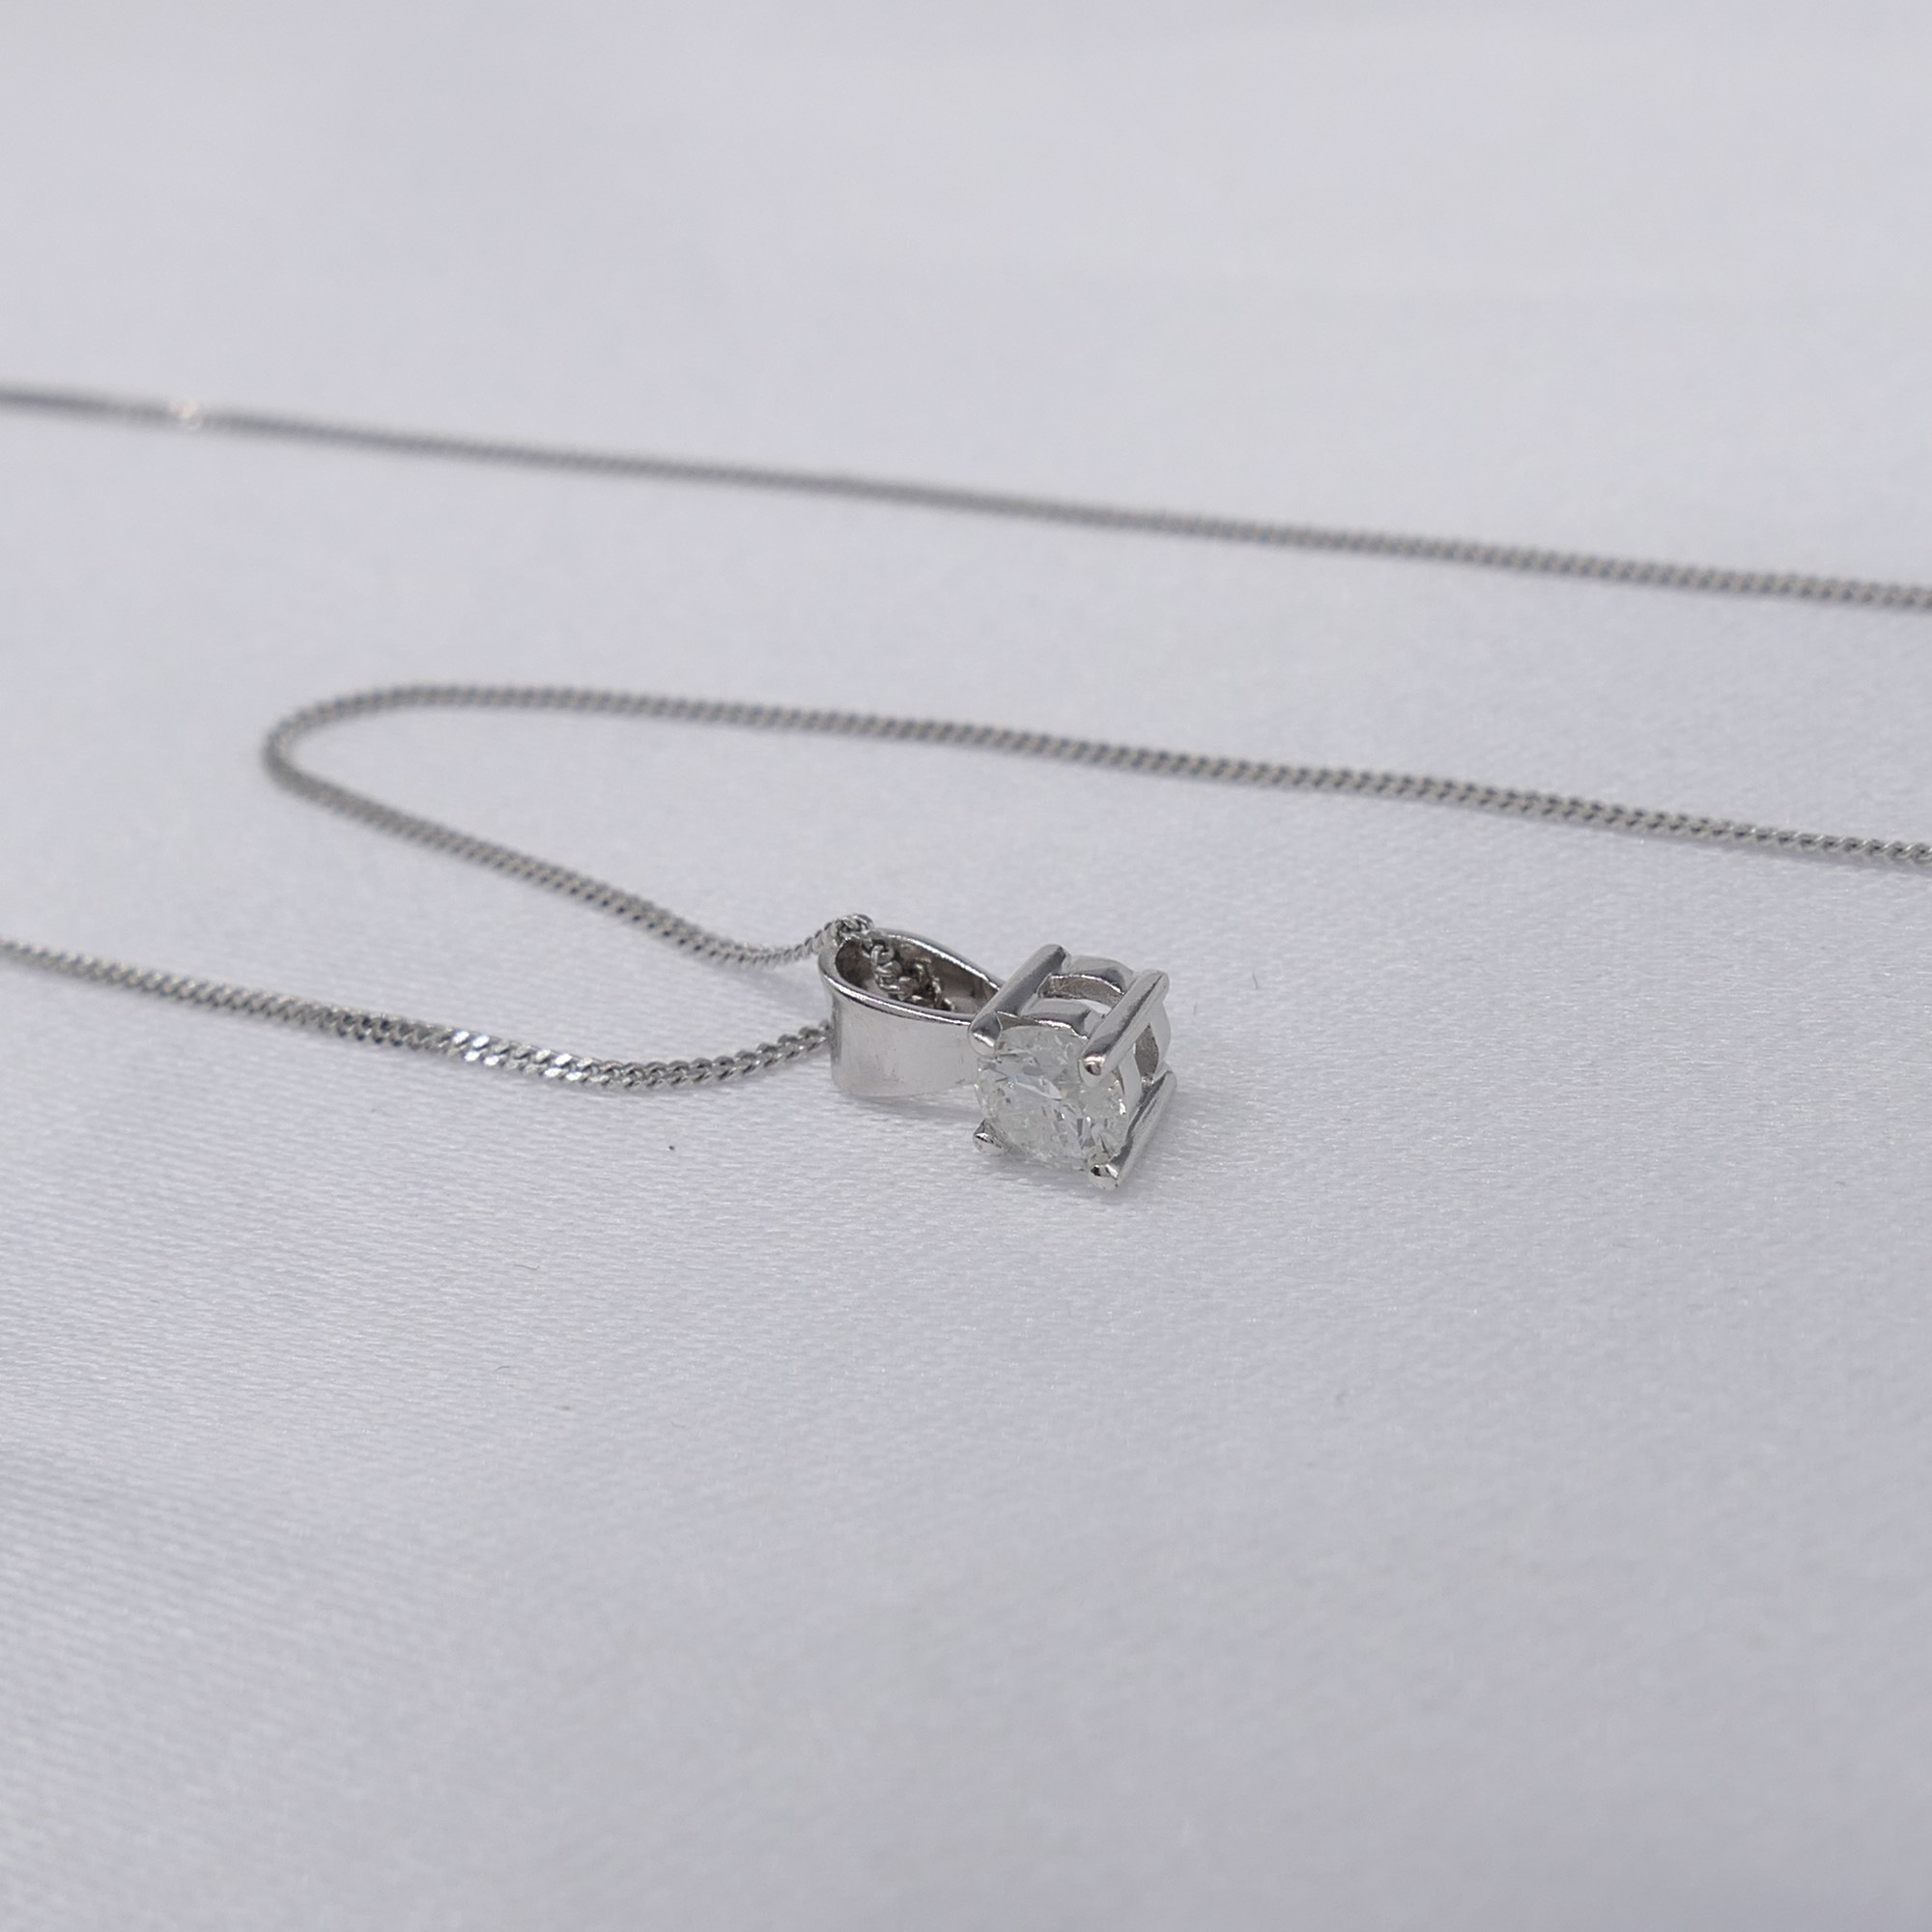 0.15 Carat Diamond Solitaire Necklace In White Gold, With Magnetic Gifting Box - Image 8 of 8